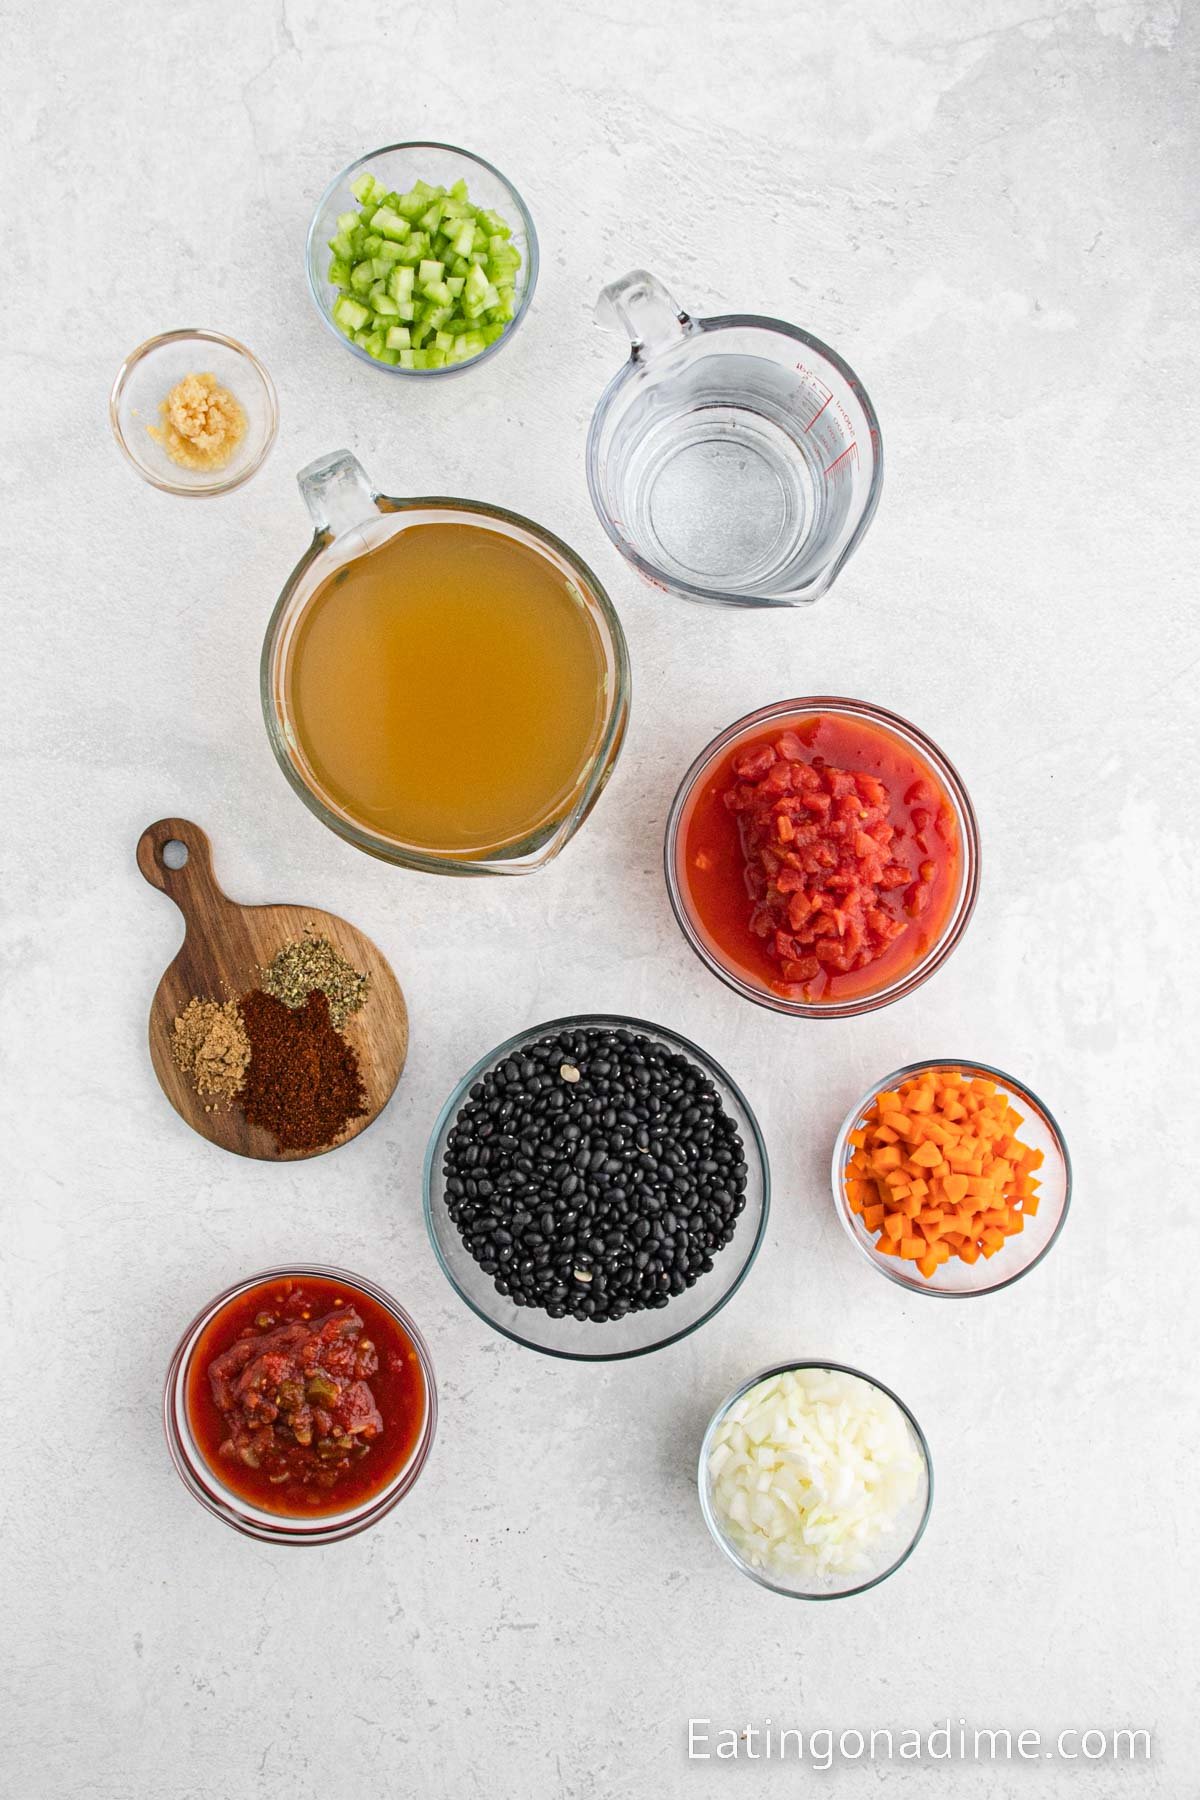 Ingredients needed for Black Beans Soup - Minced garlic, onion, celery, carrots, black beans, salsa, chili powder, cumin, dried oregano, broth, water, diced tomatoes, bay leaves